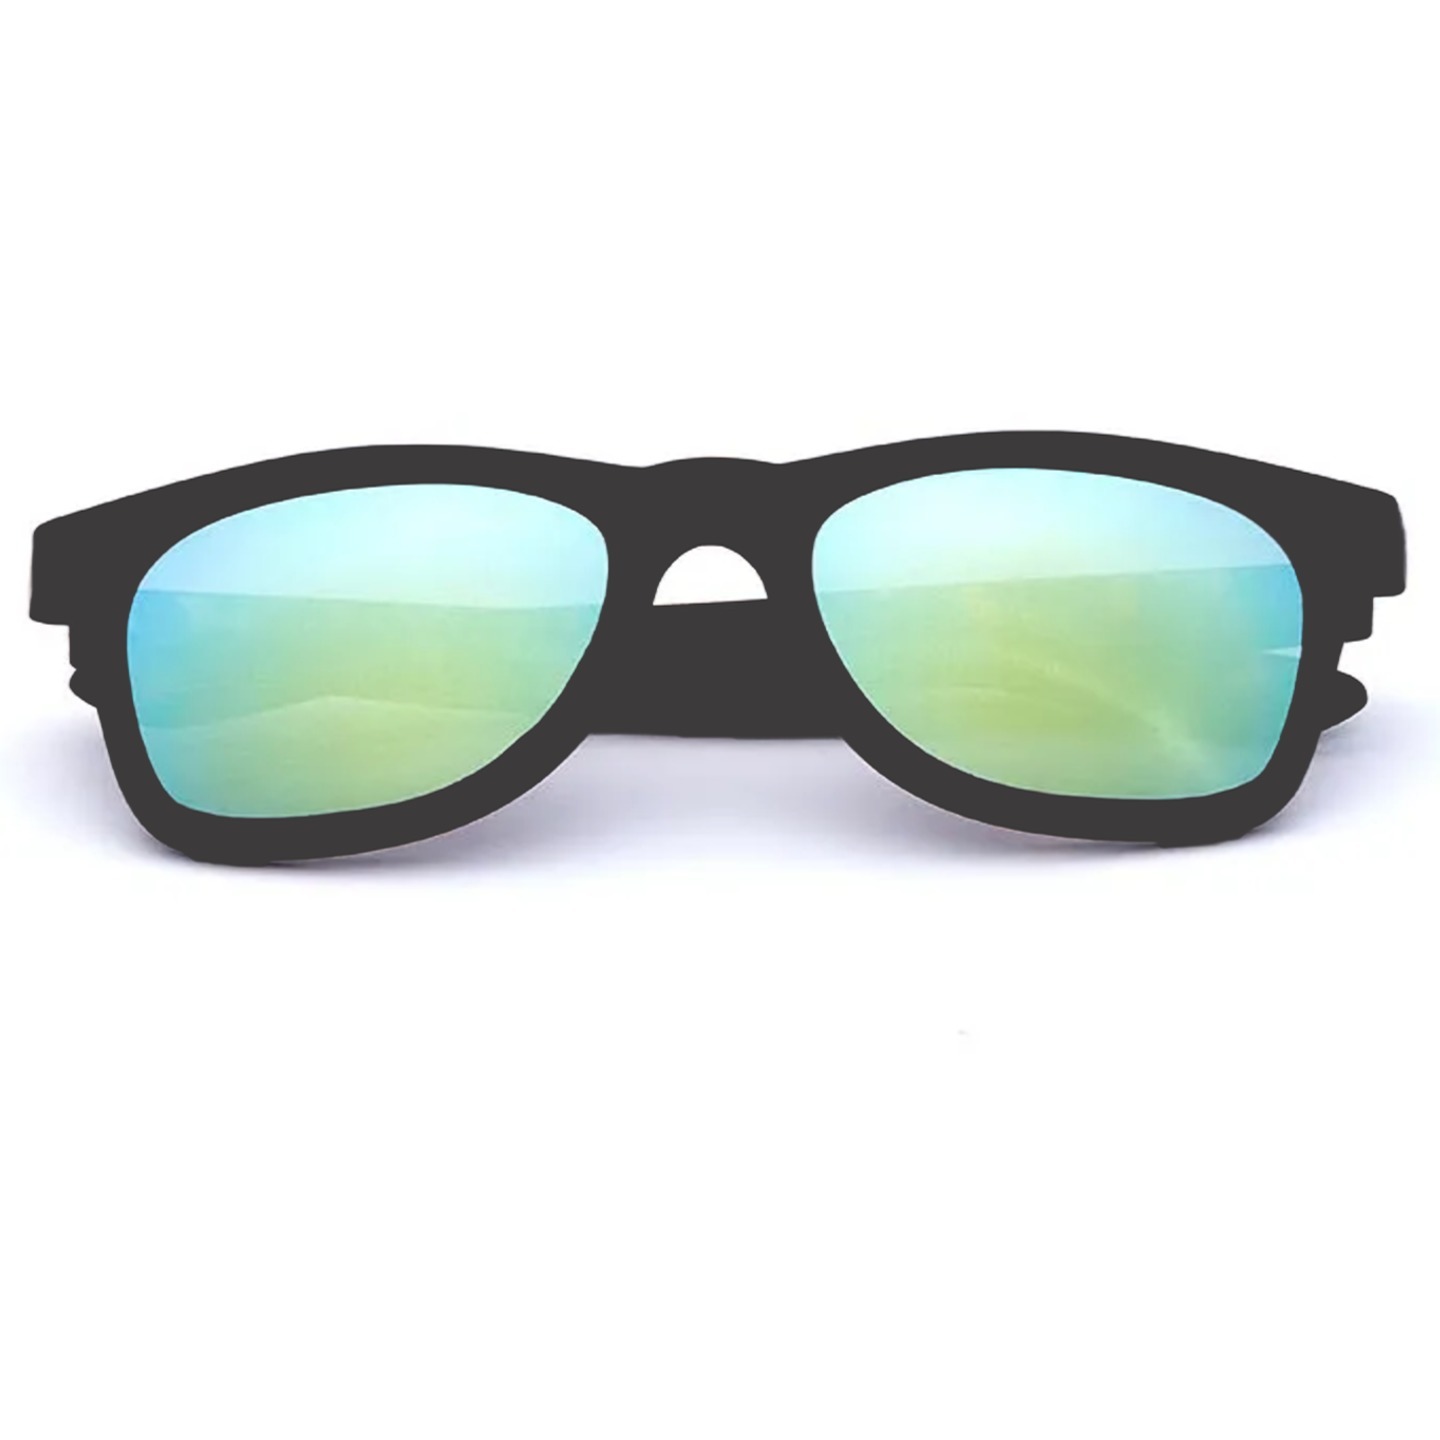 Green Tint Mirrored Lens Square Frame Sunglasses